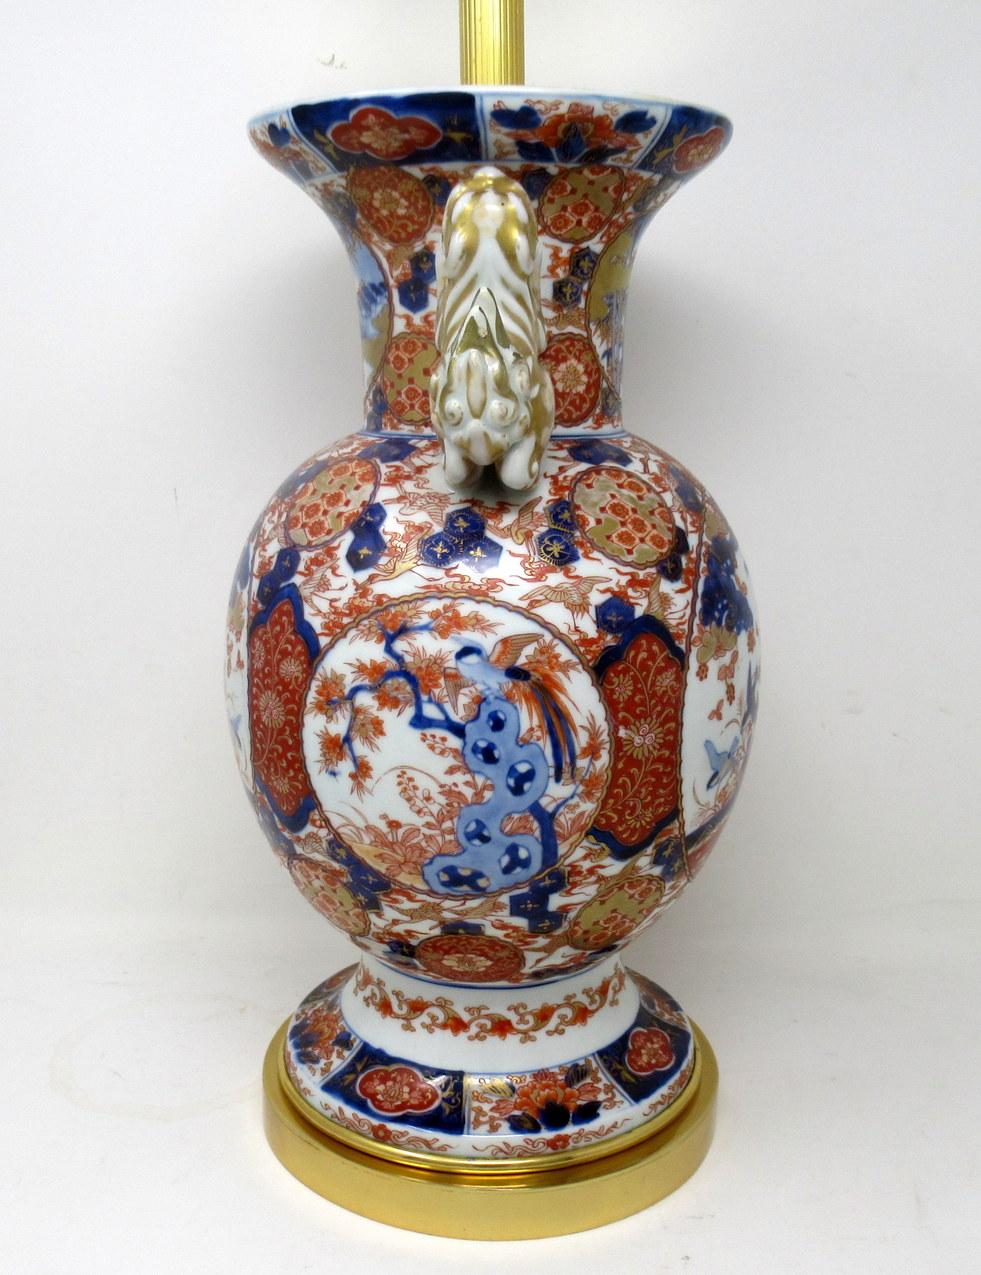 Early Victorian Antique Japanese Chinese Imari Porcelain Ormolu Table Vase Lamp Blue Red Gilt